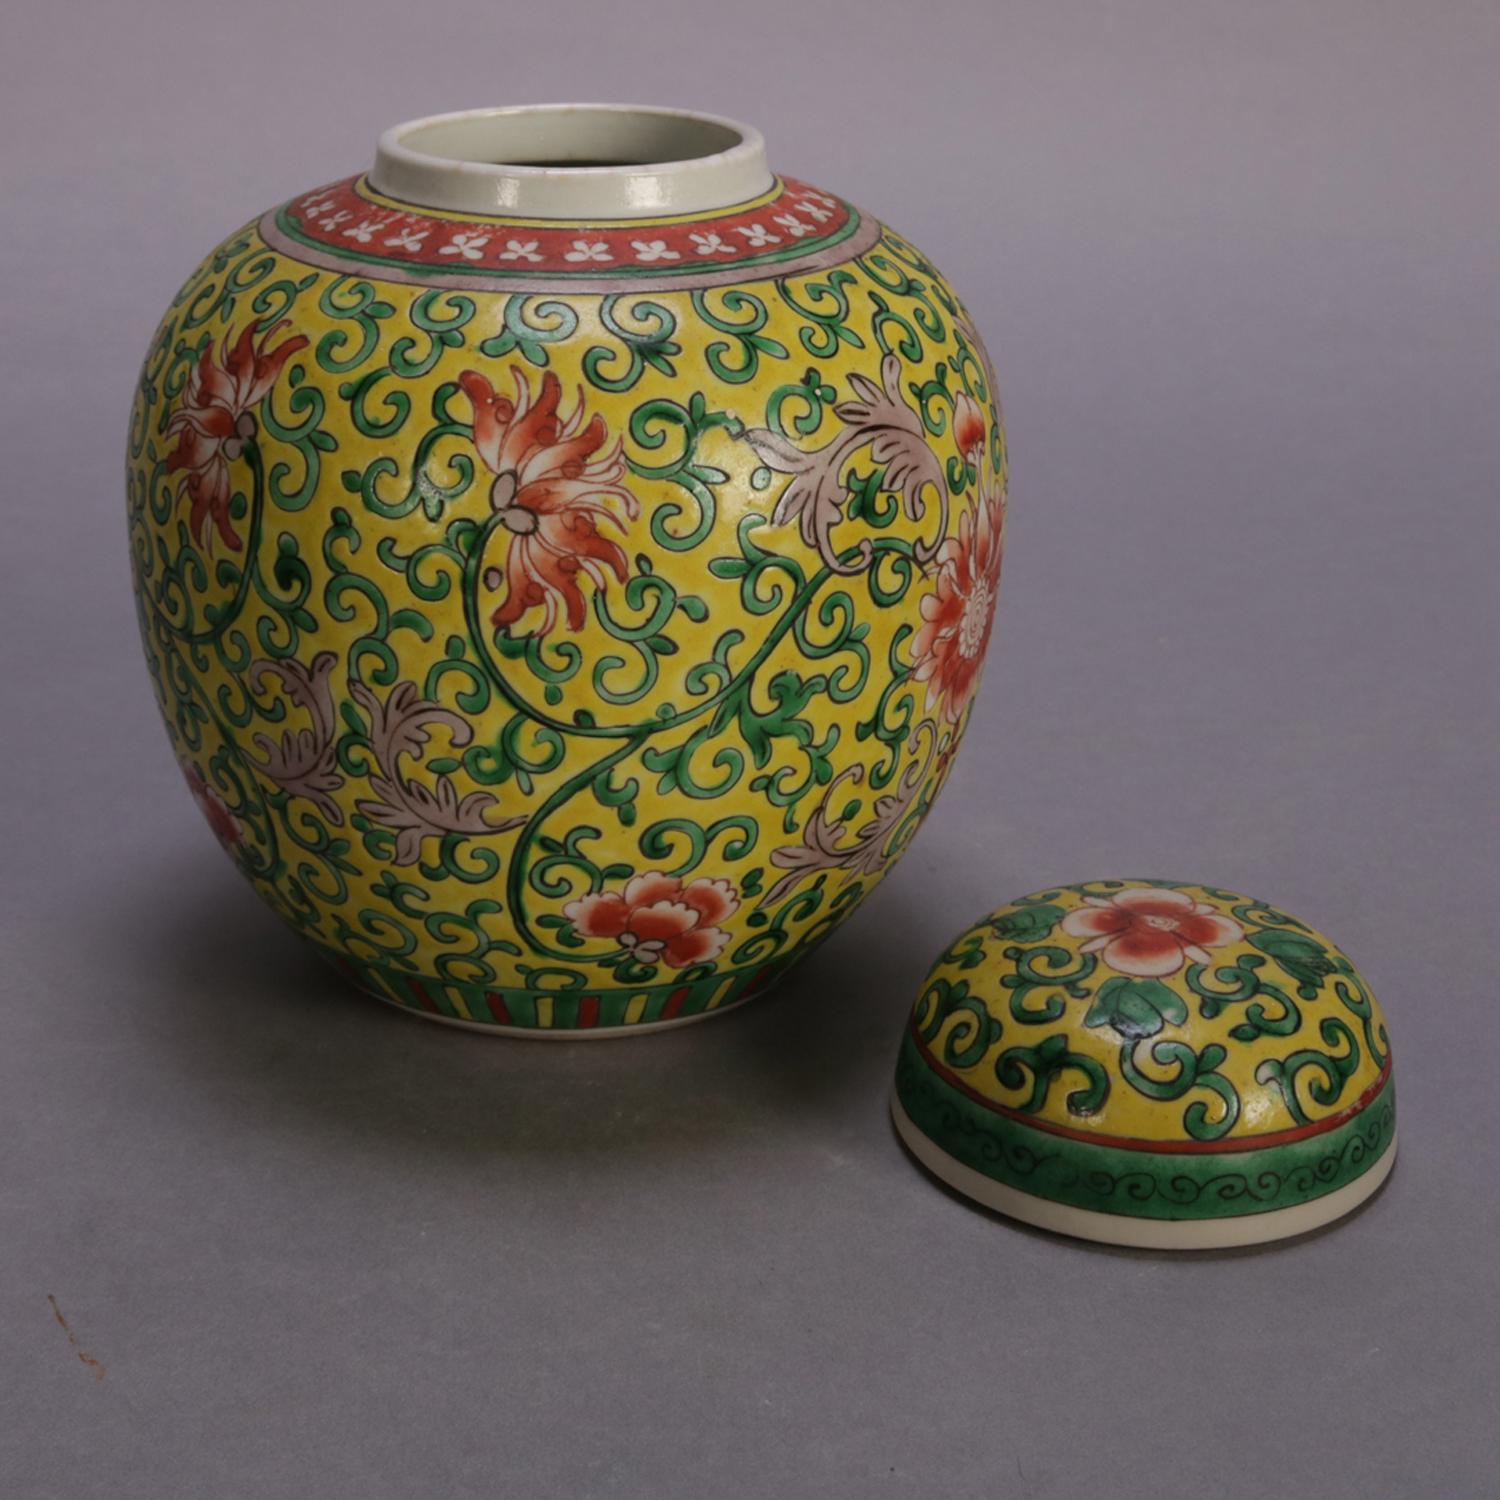 A Chinese enameled ceramic covered ginger jar in the foliate lotus Mun Shou pattern on yellow ground, CHINA mark on base, 20th century

Measures: 8